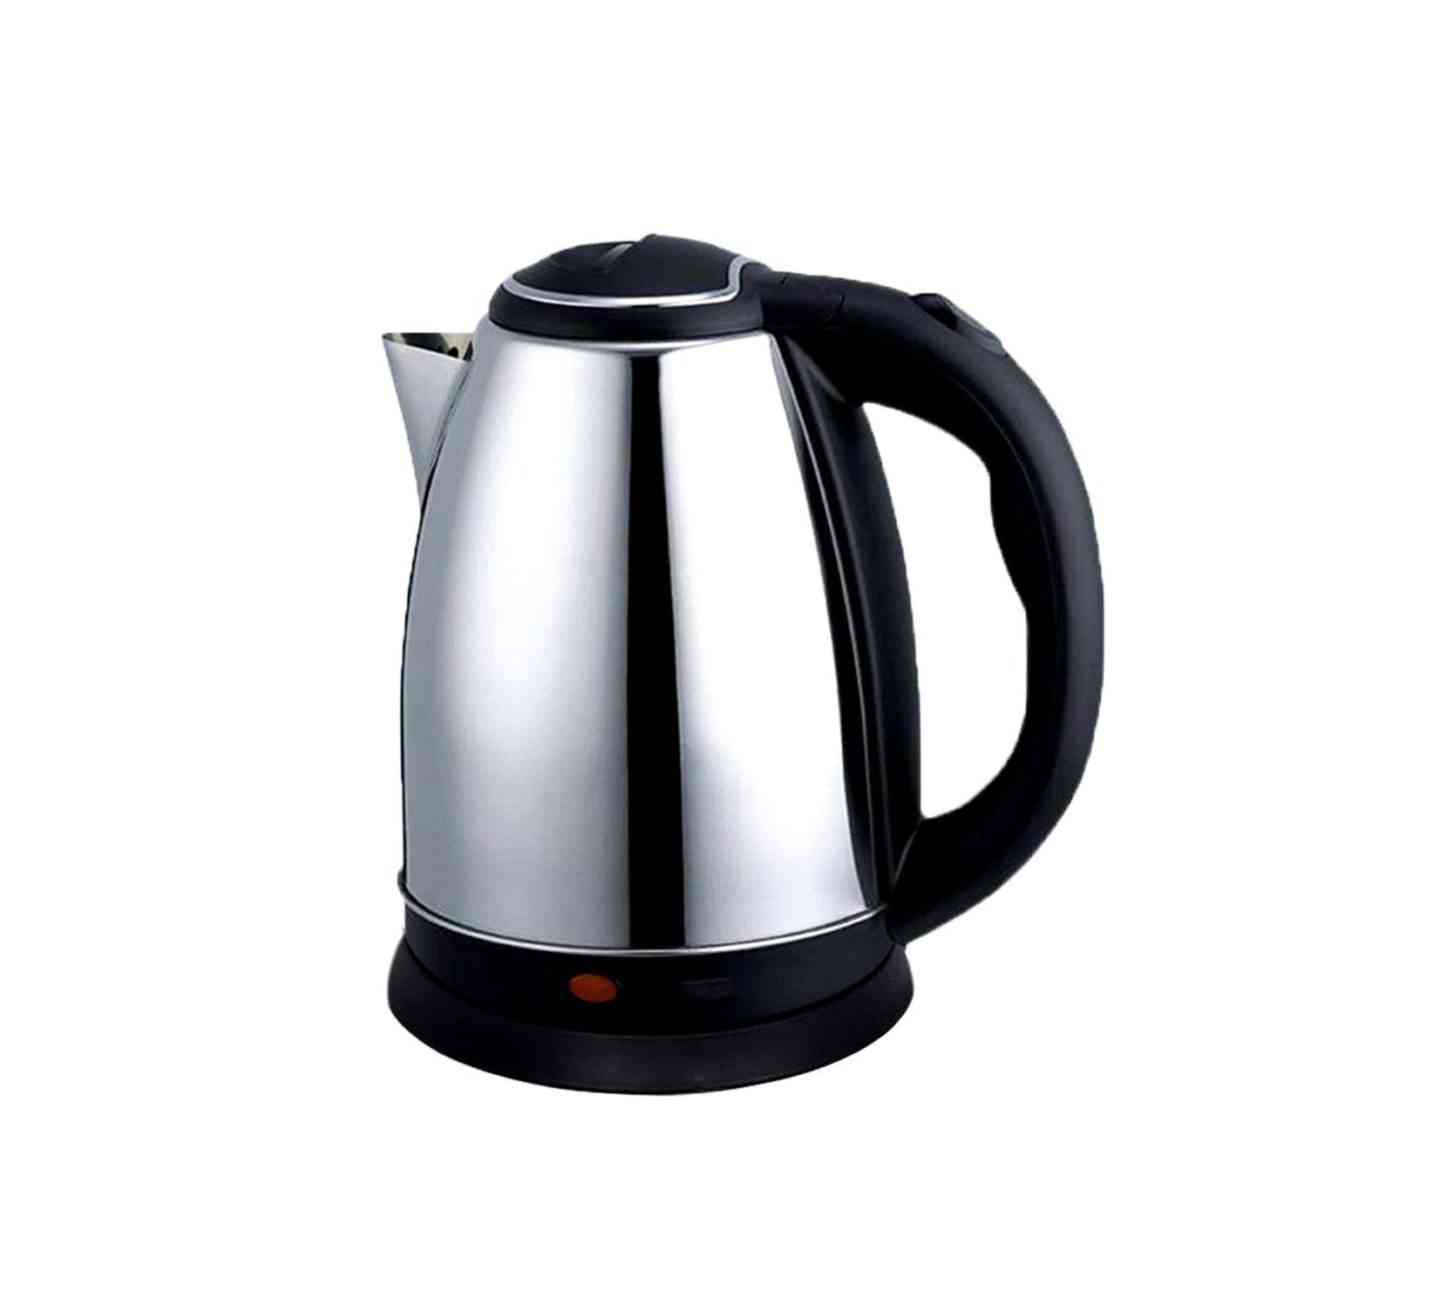 Kawashi Electric Kettle 1.8L: Buy Sell Online @ Best Prices in ...